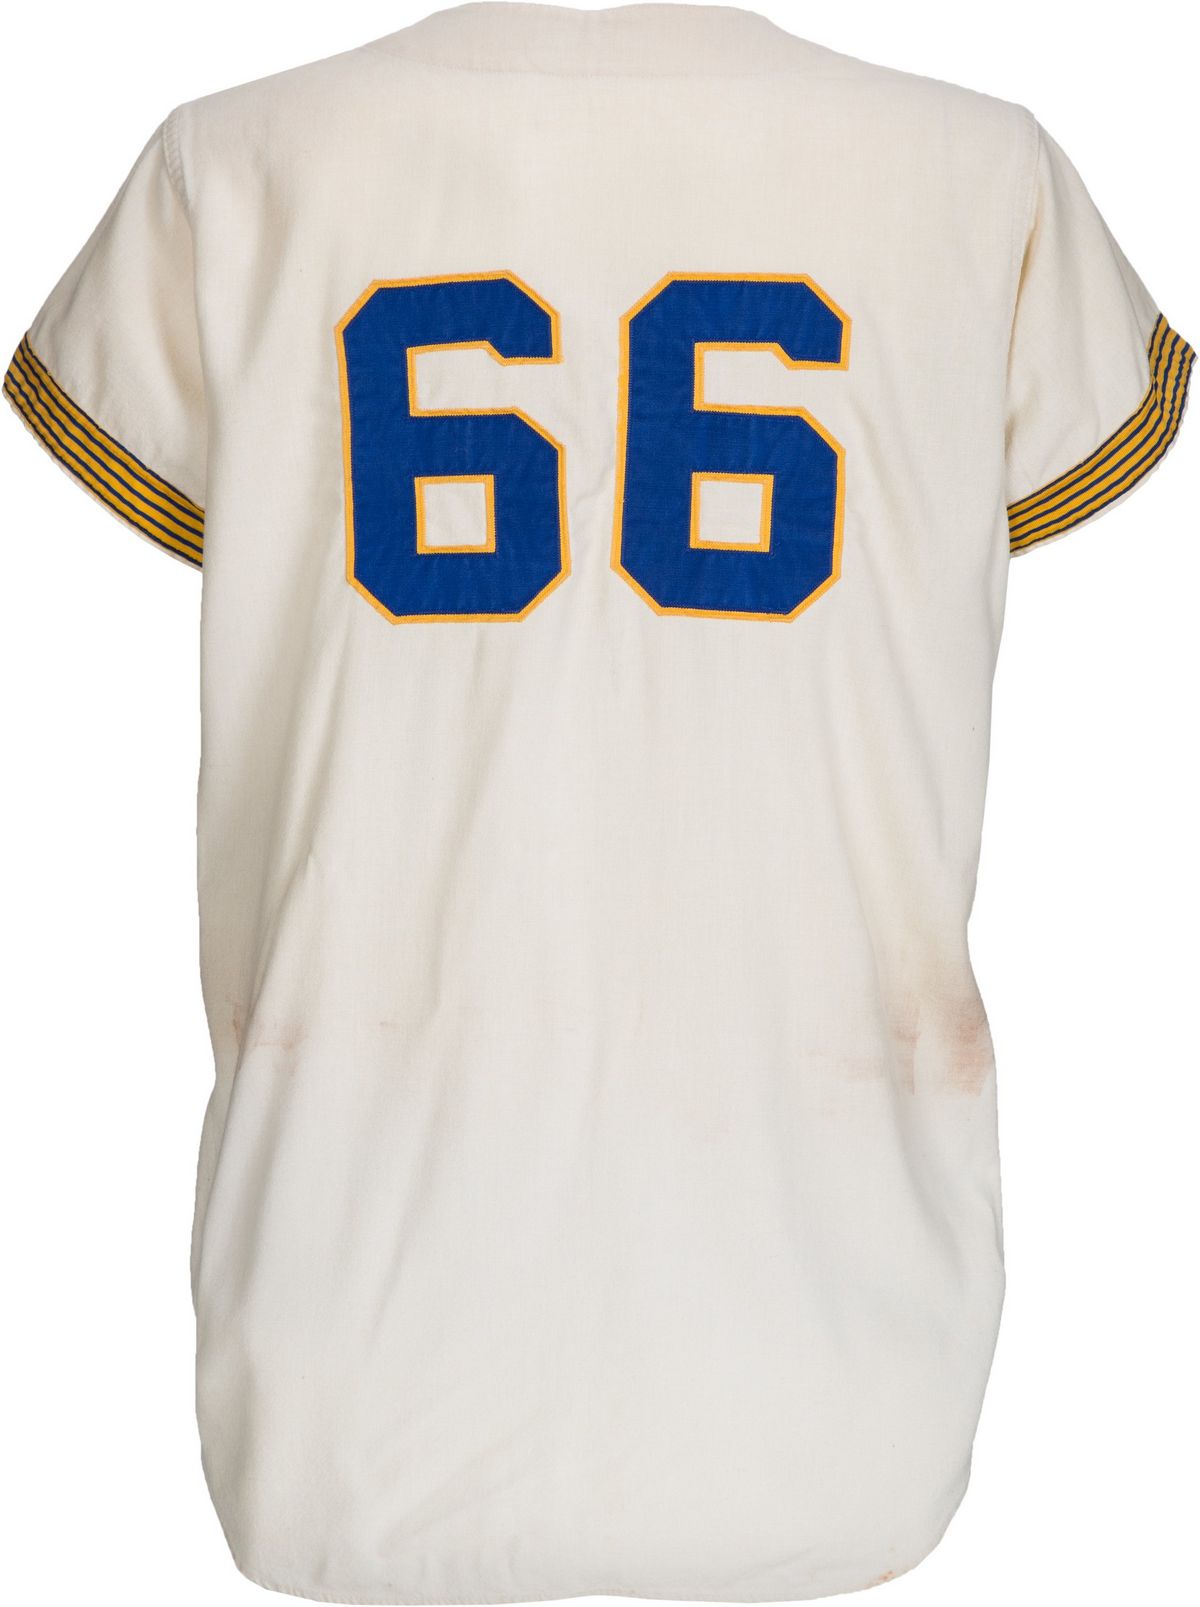 The 1969 Seattle Pilots—One Team, One Season, Many Uniforms — Todd